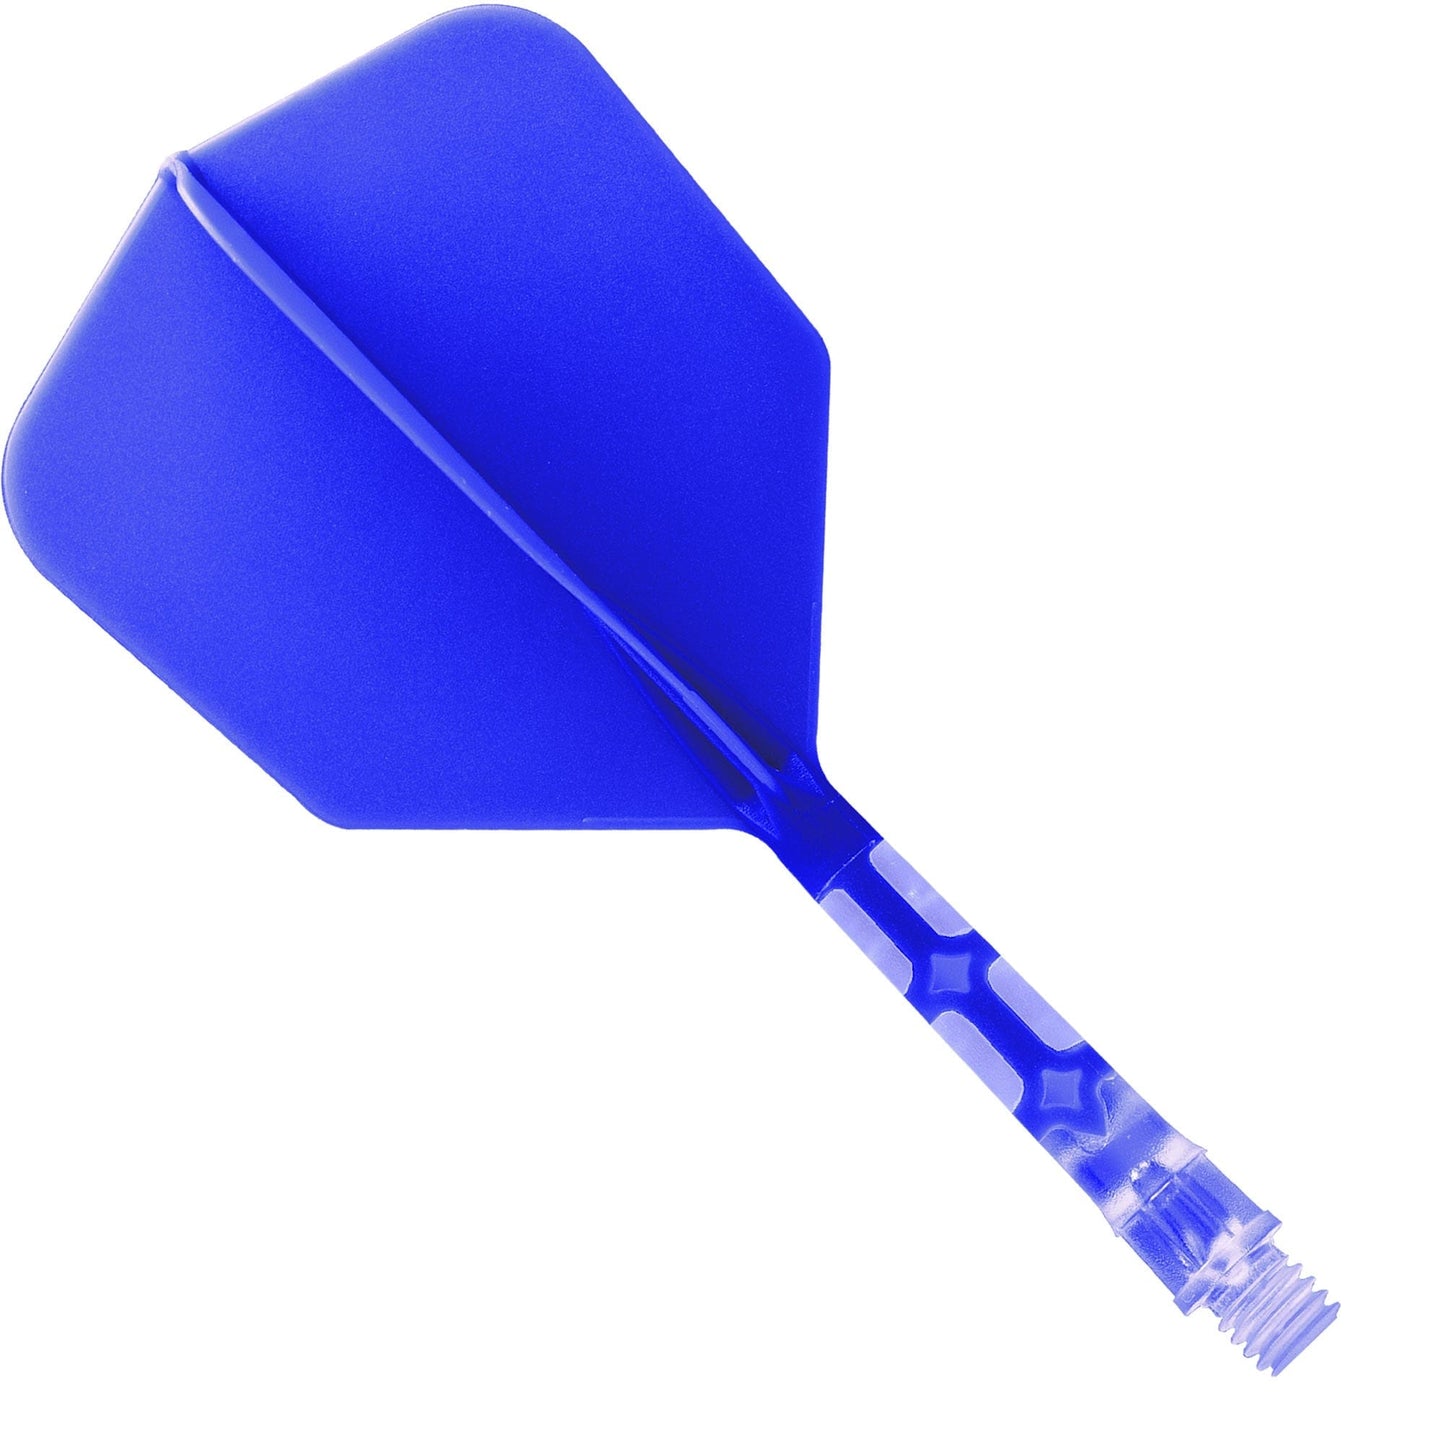 Cuesoul Rost T19 Integrated Dart Shaft and Flights - Big Wing - Clear with Blue Flight Medium